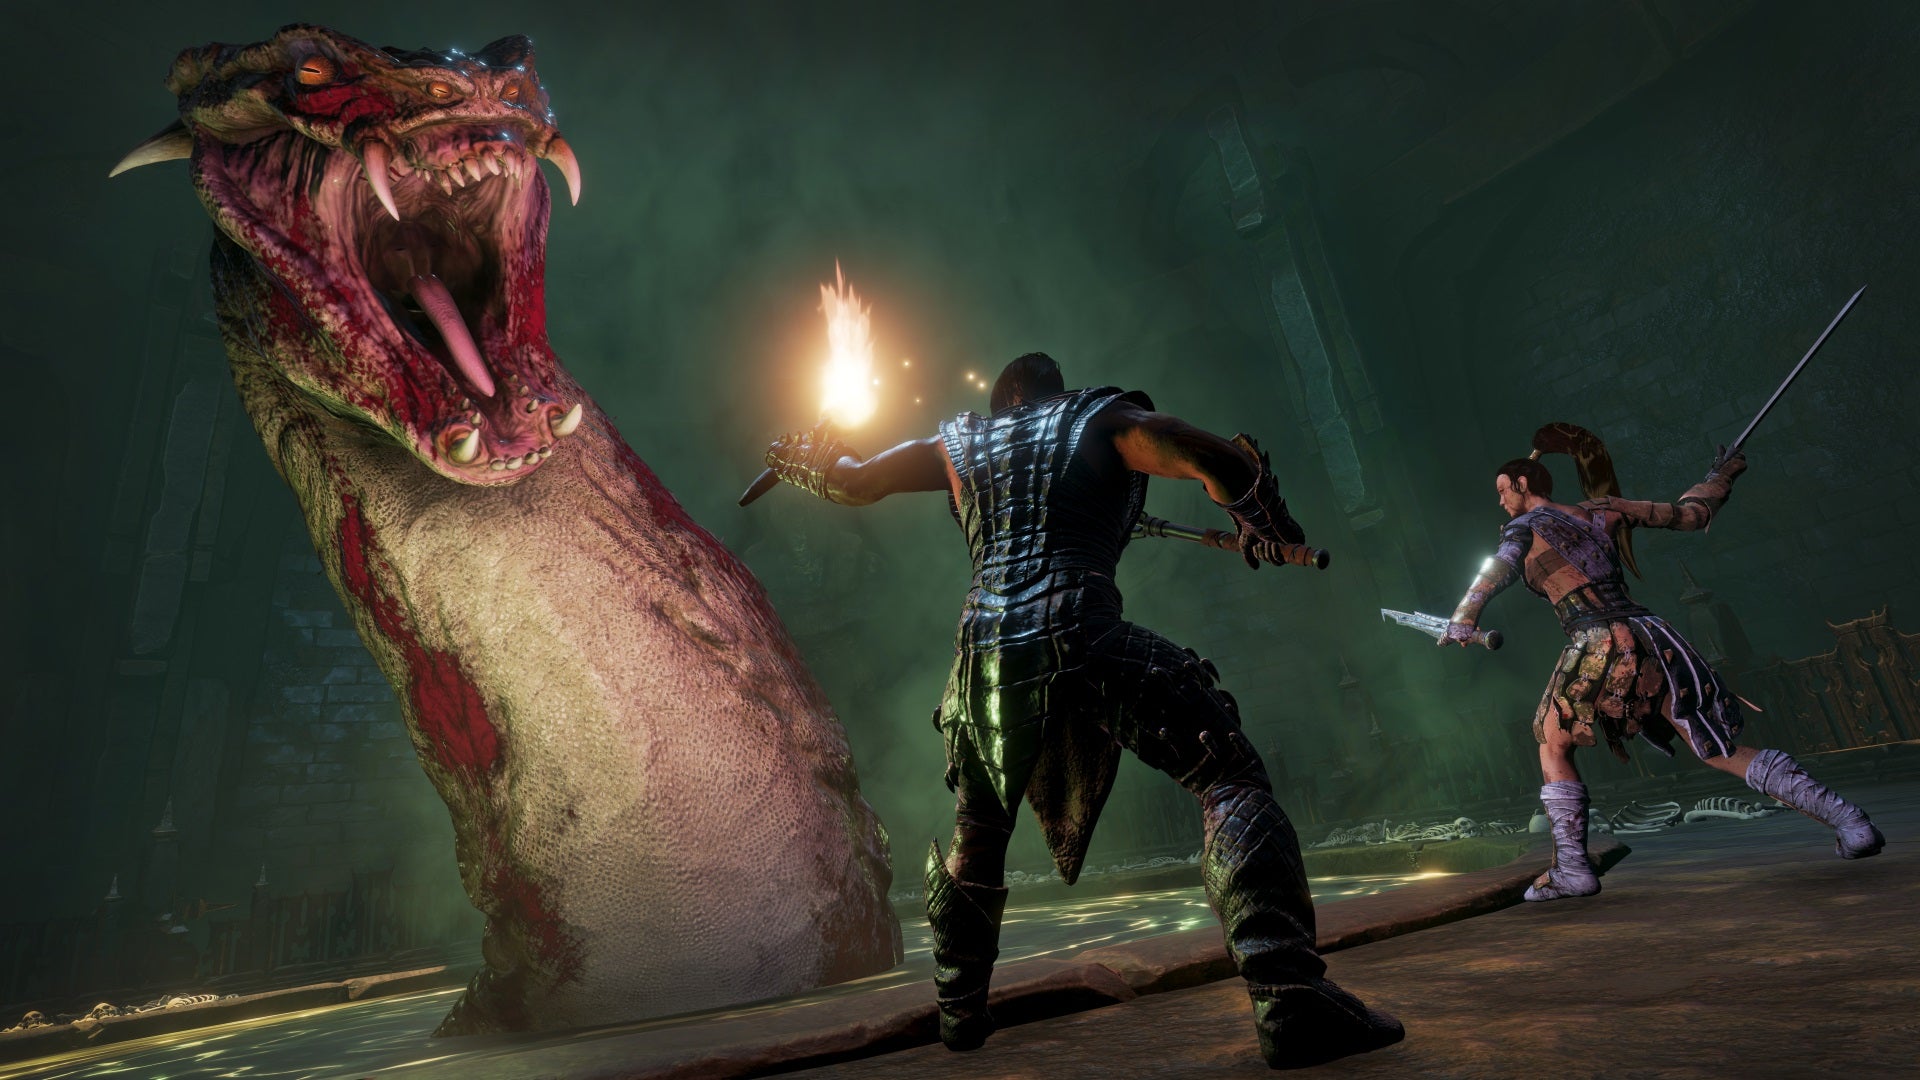 Players fighting a large monster in Conan Exiles game.